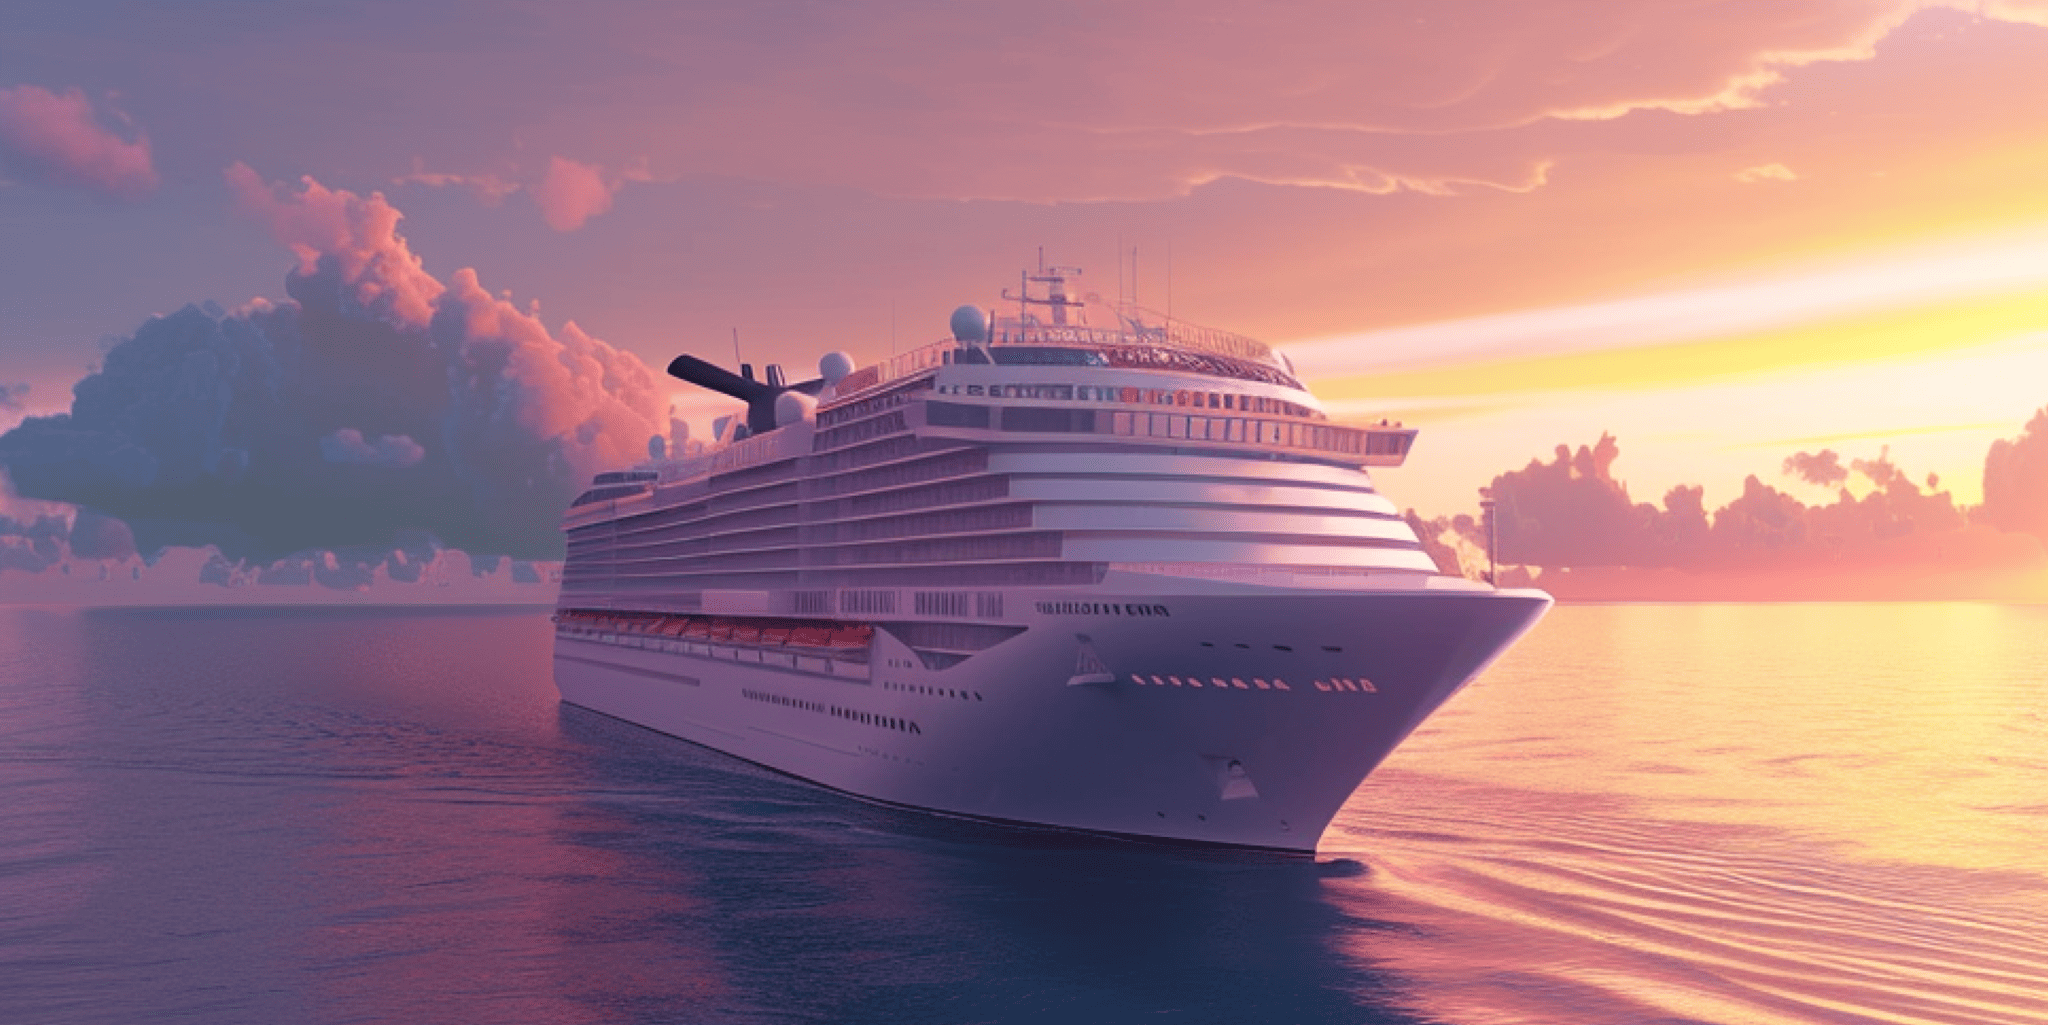 Quality Engineering Waves – Optimizing Cruise Line Operations Through Comprehensive Testing